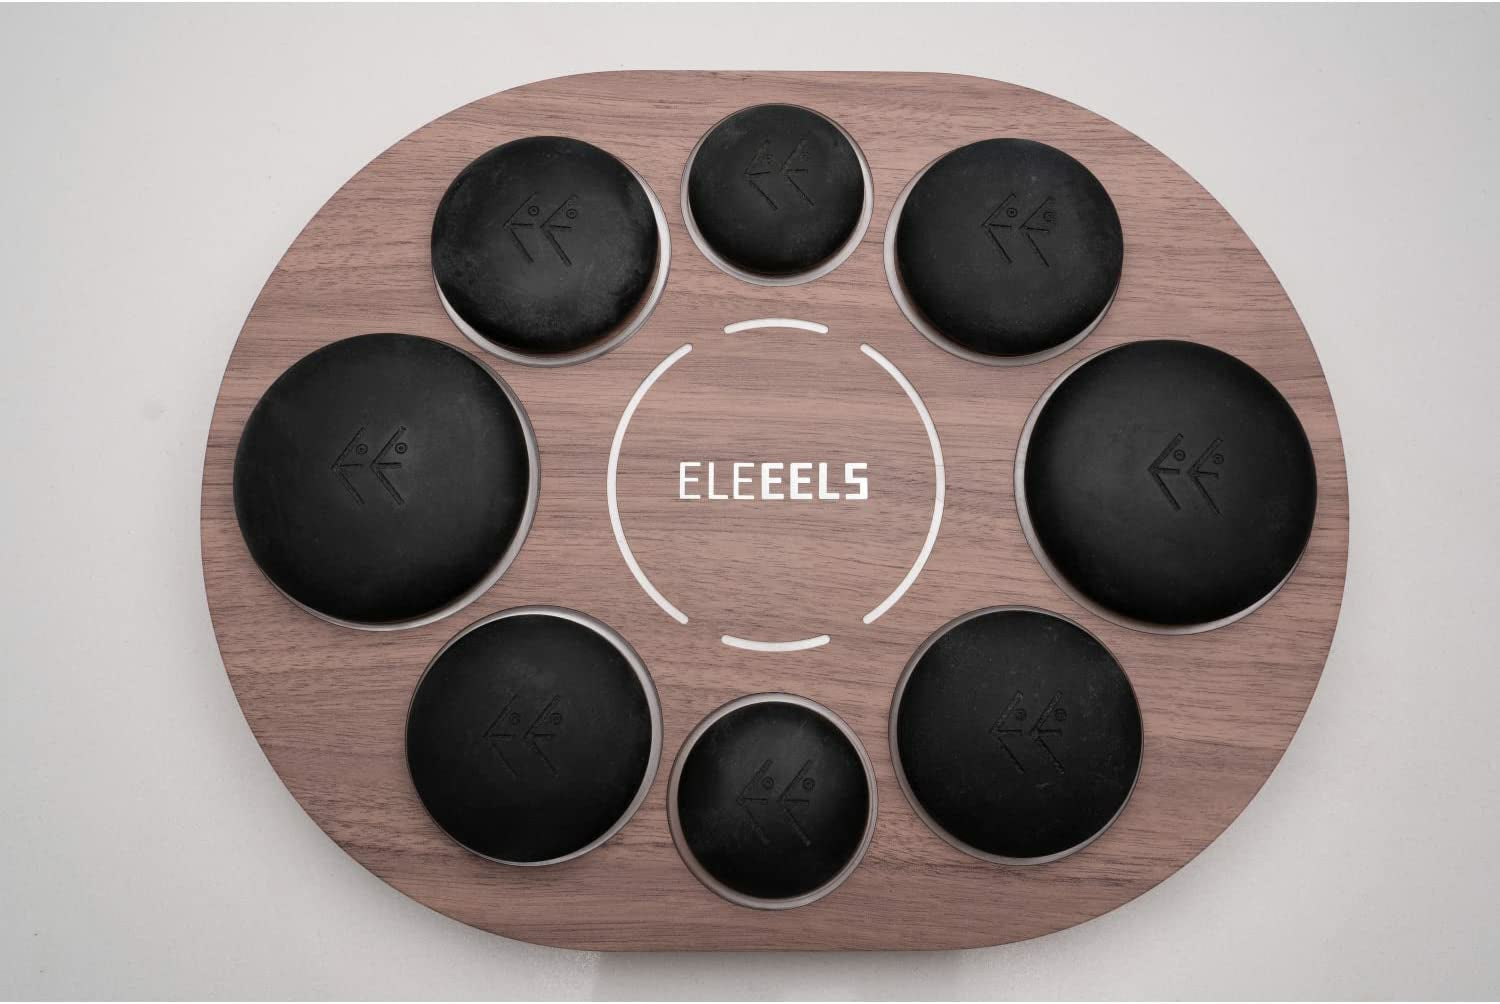 Eleeels S1 Revival Hot Massage Heating Stones Spa Collection Kit, One Size, Black A2